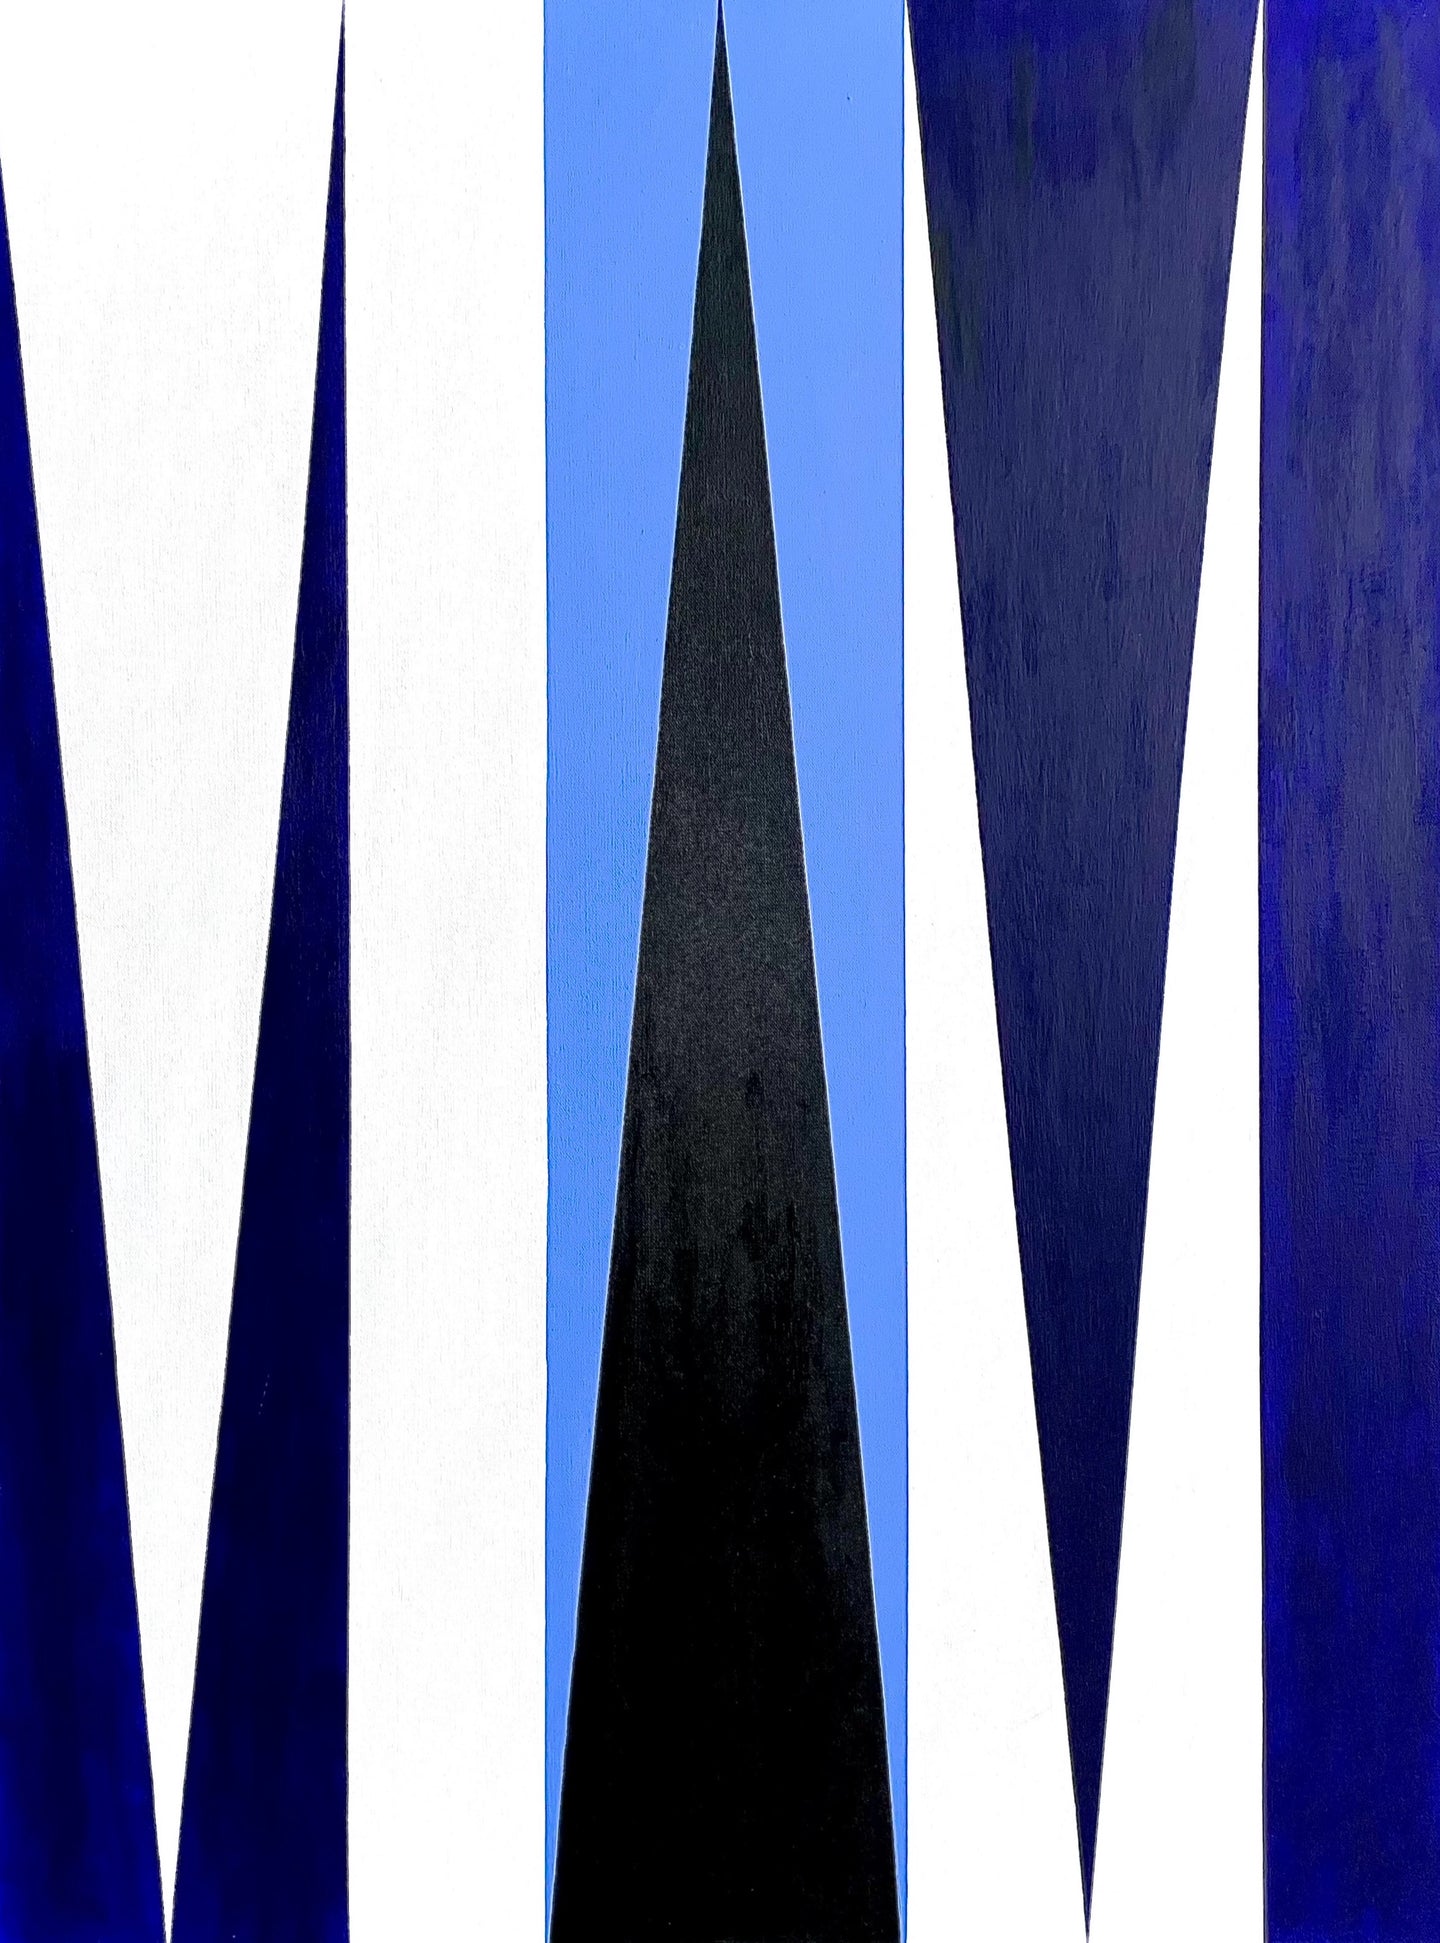 Ron Burkhardt, Miami Blues (Letterscape), 2019, Acrylic painting on Canvas, 40 x 30 inches, contemporary art for sale